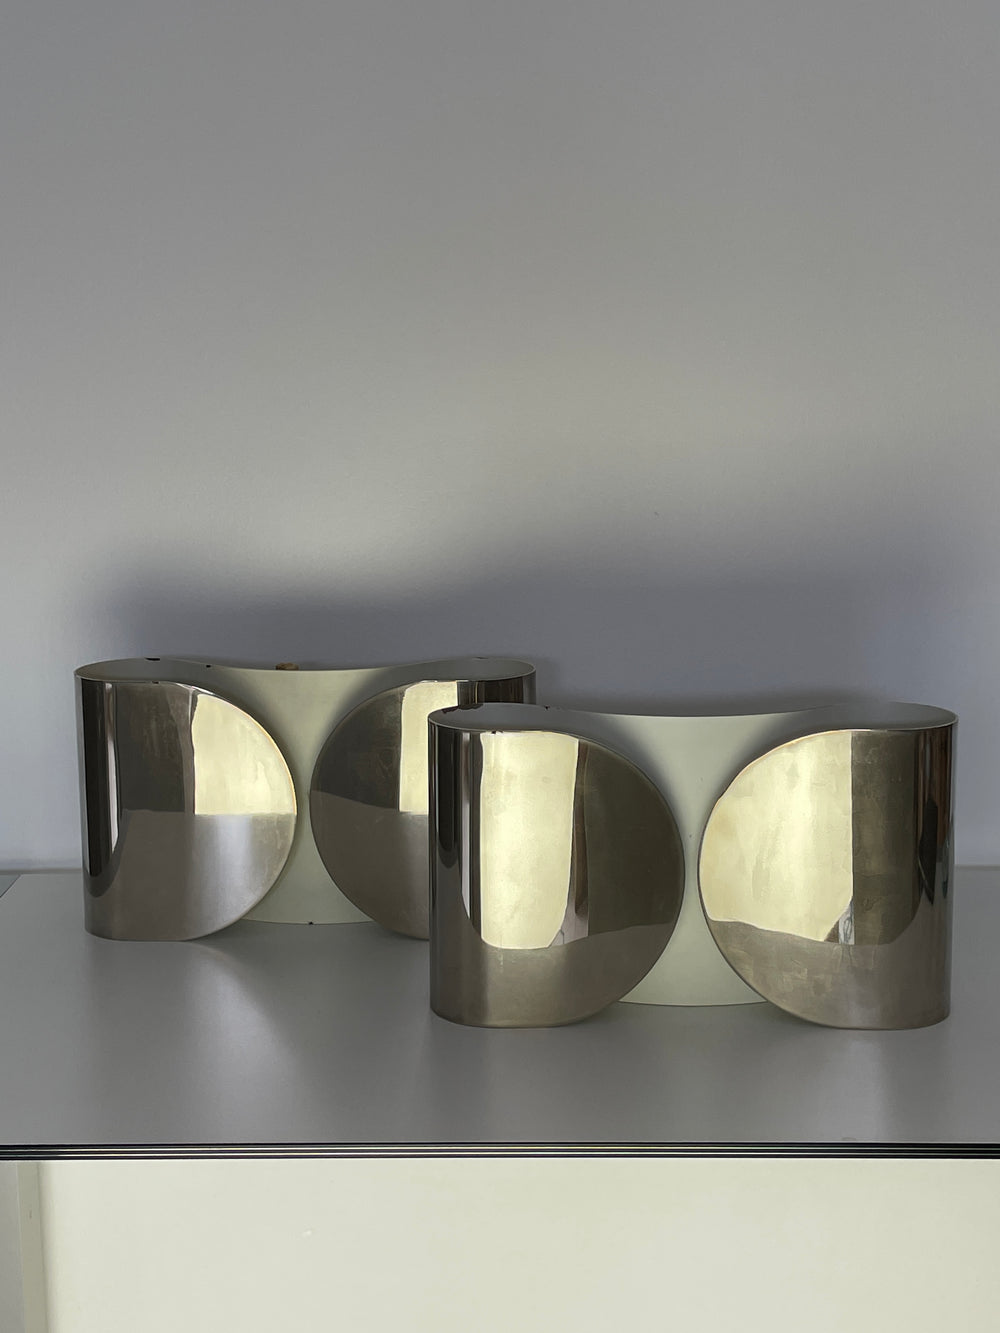 Afra Scarpa & Tobia Scarpa model "Foglio" wall sconce lamp for Flos, Italy, 1970s